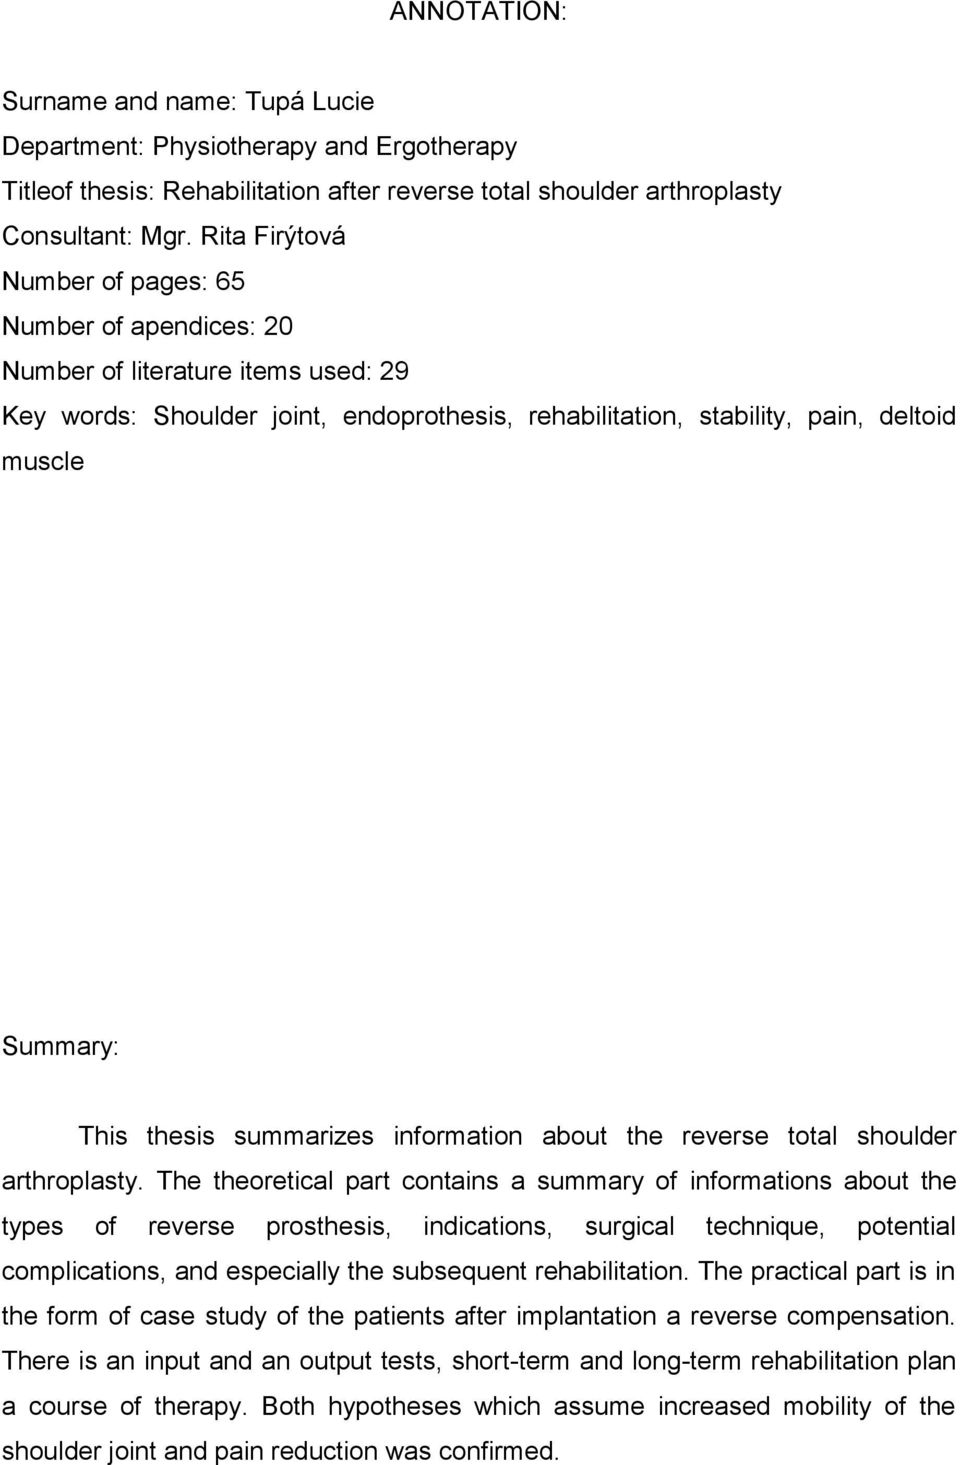 thesis summarizes information about the reverse total shoulder arthroplasty.